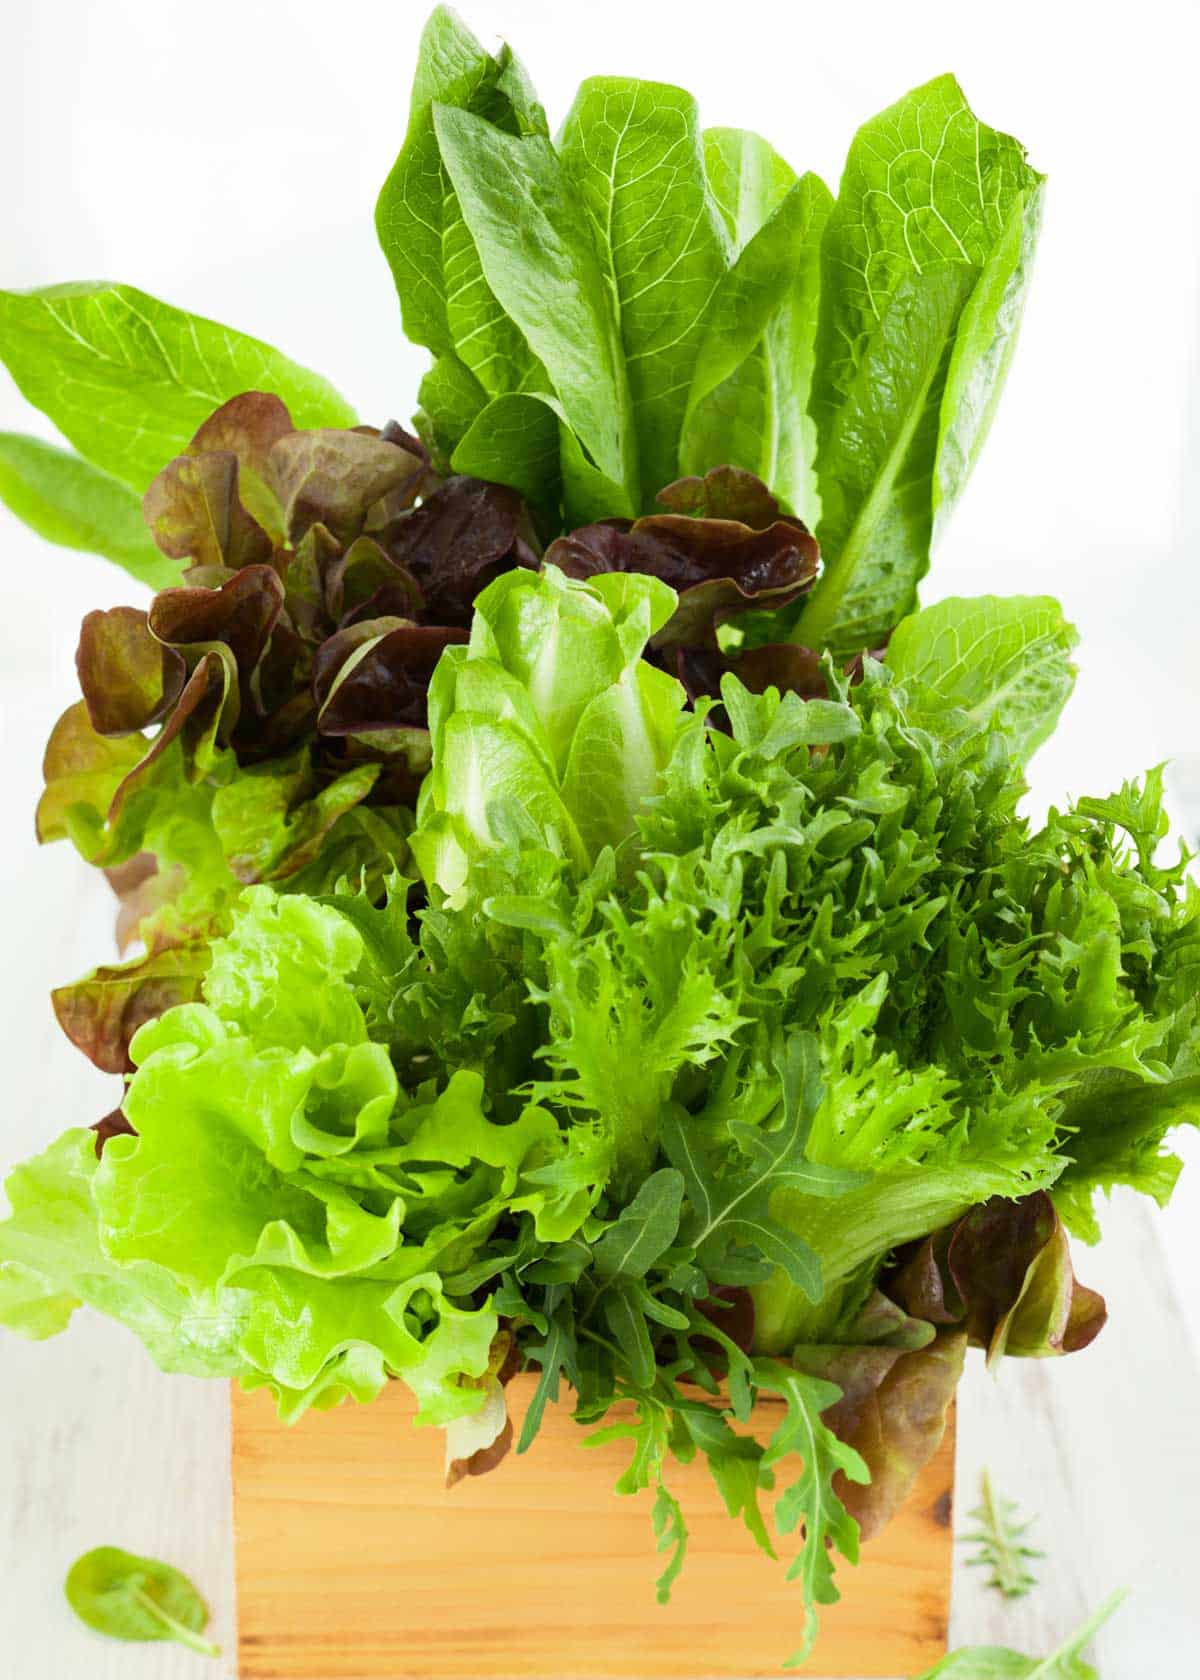 Mixed lettuces are shown in a wood planter on a white background.